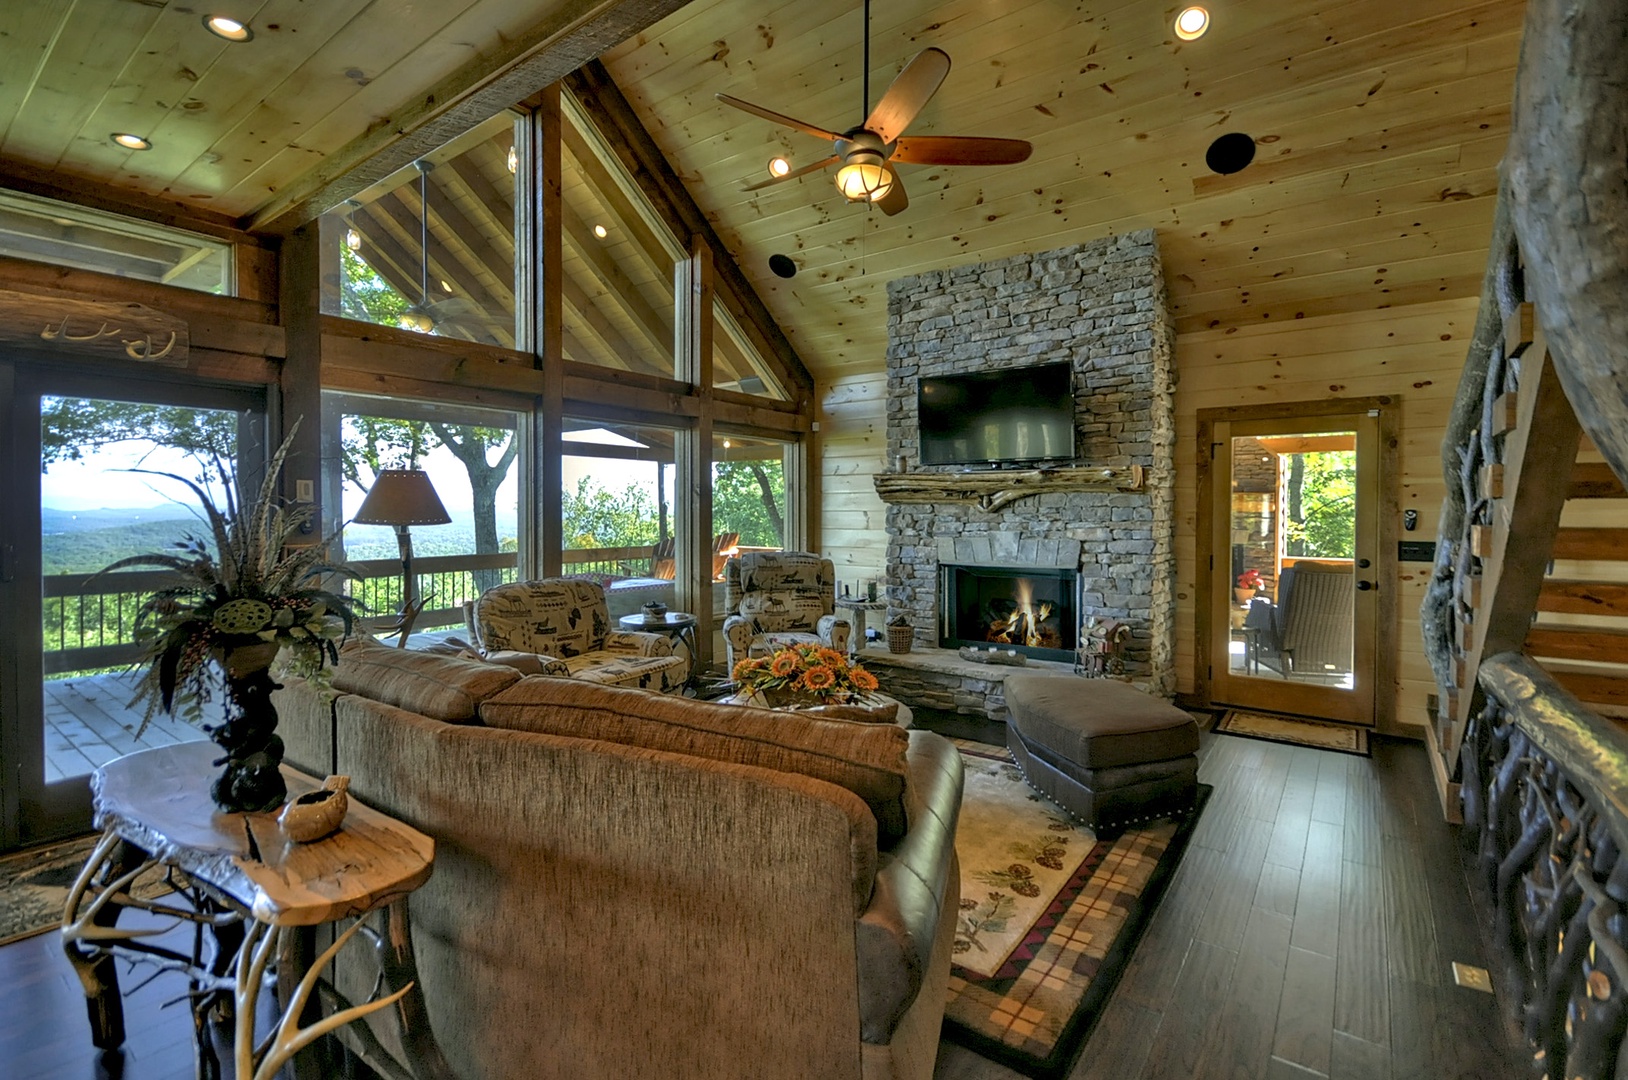 The Vue Over Blue Ridge- Living room area with a fireplace and deck access